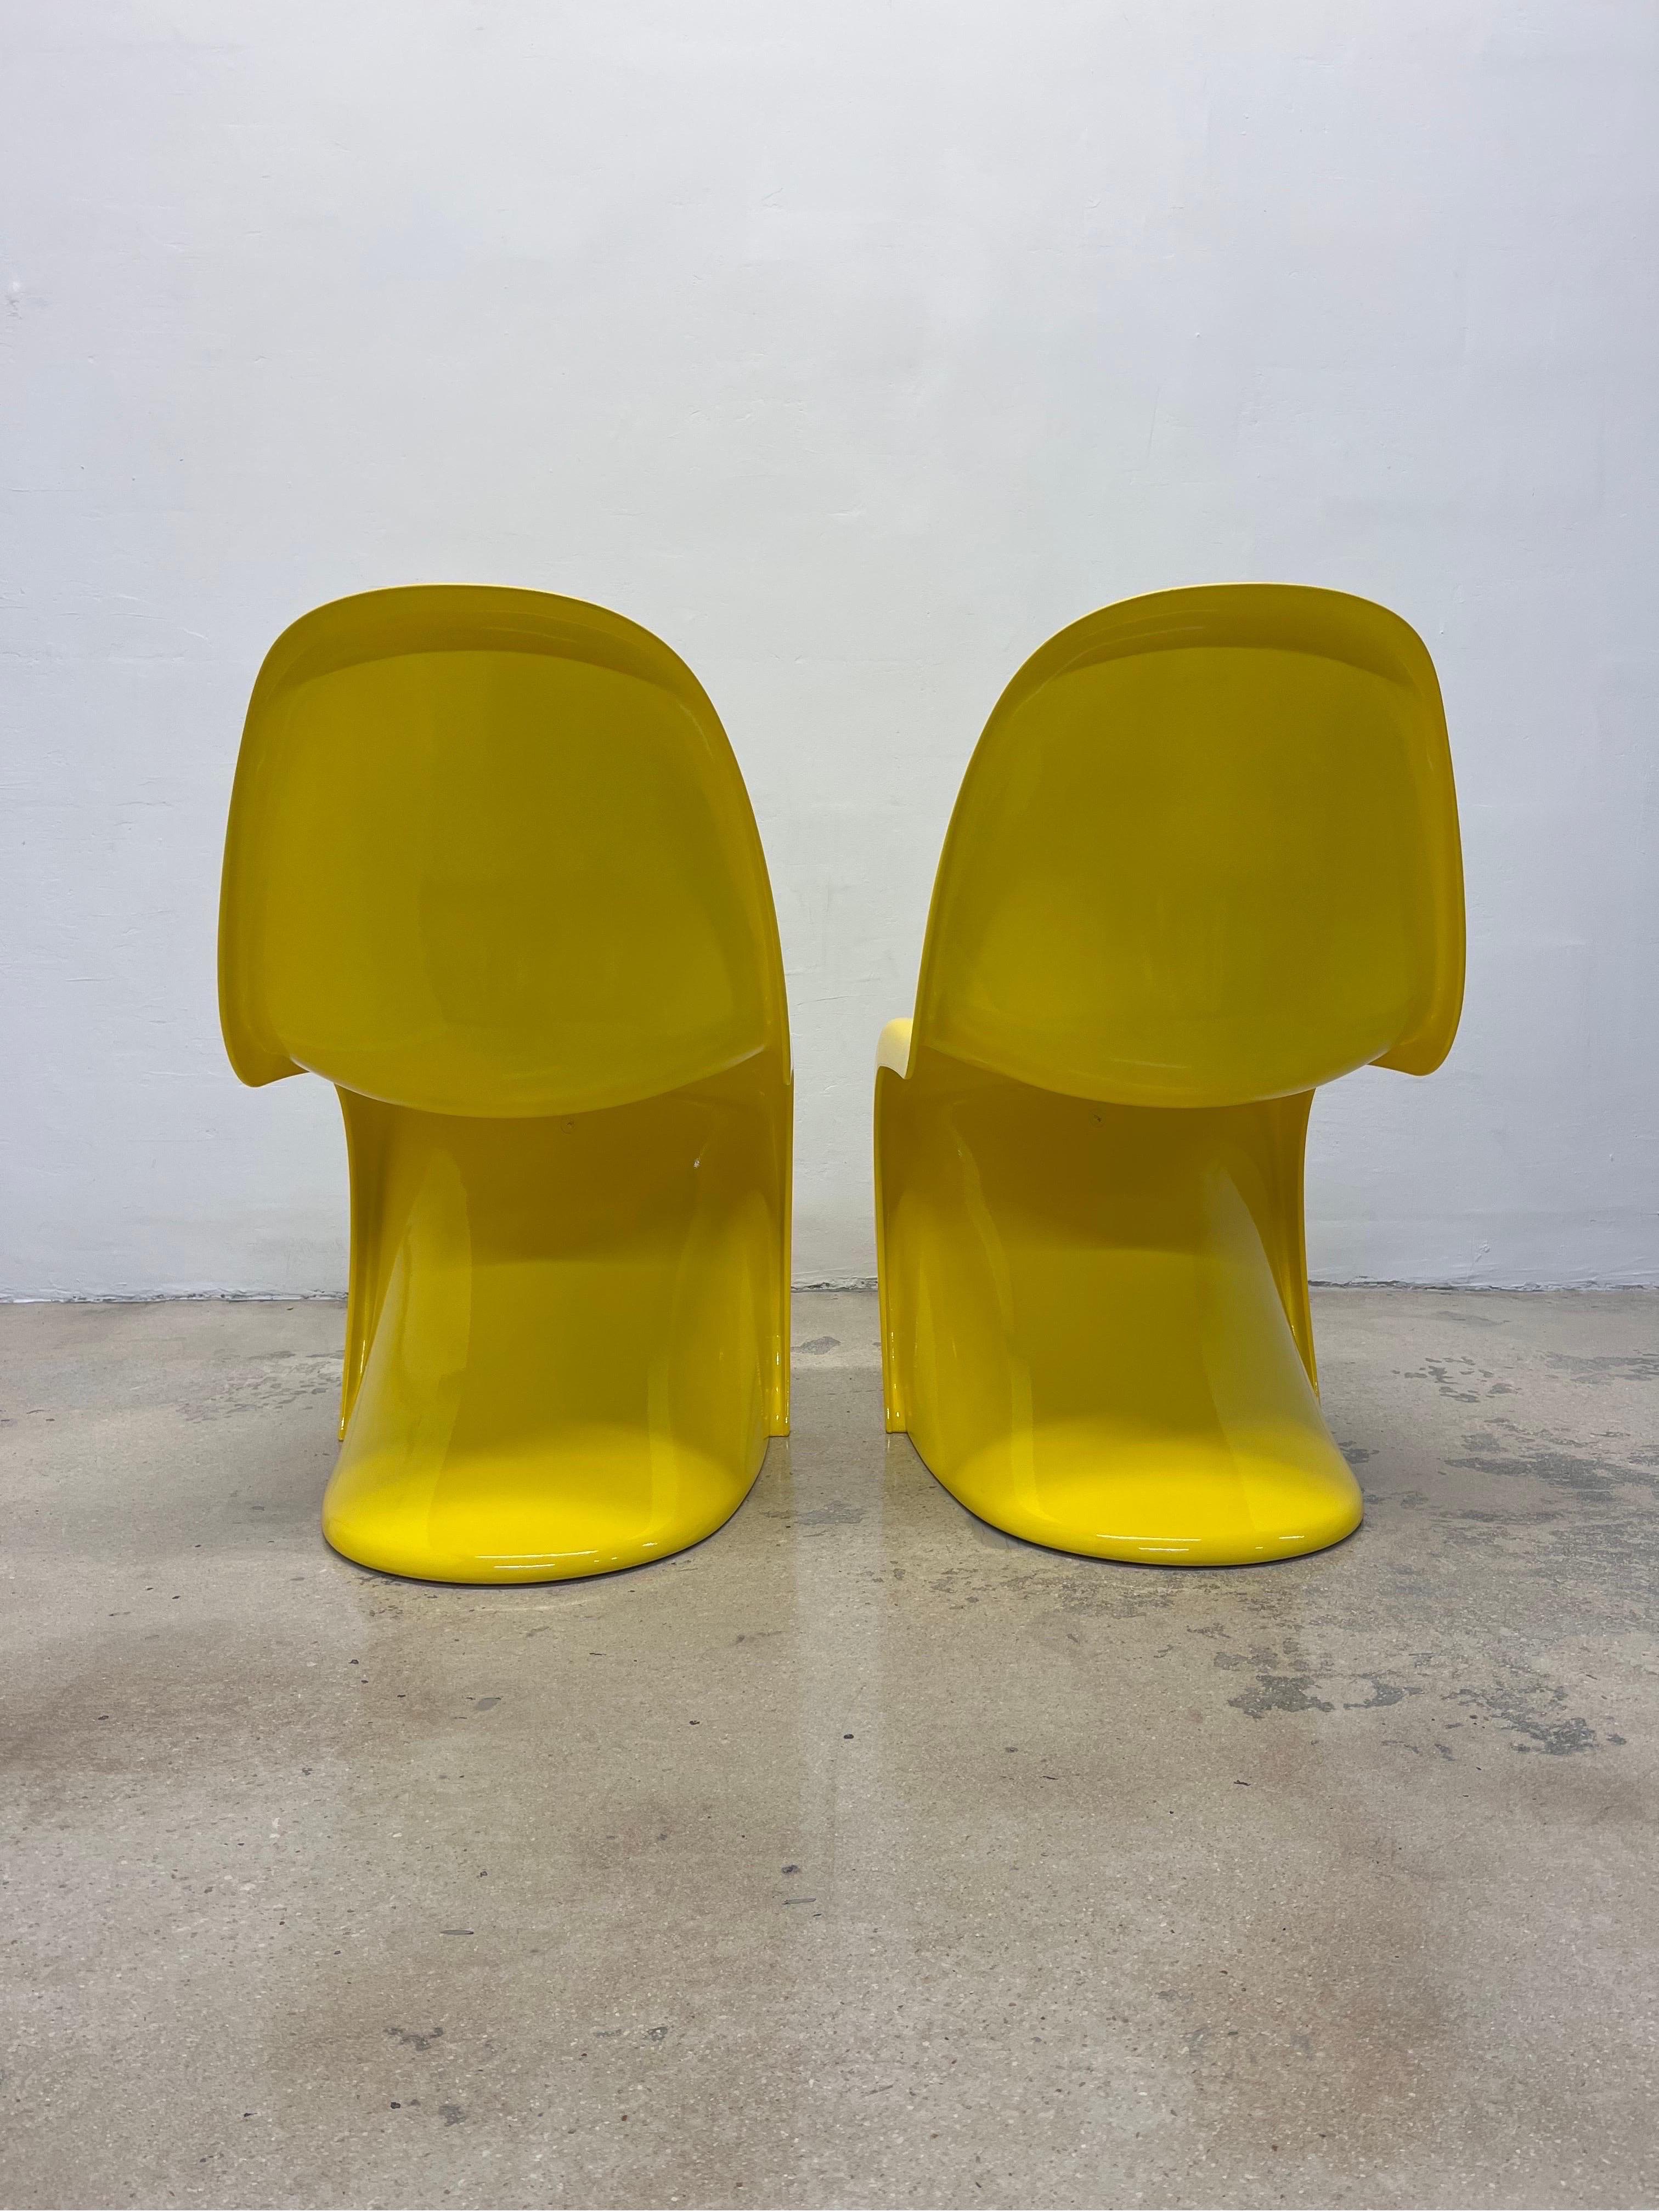 Verner Panton Classic Panton S Chairs for Vitra, 1990s - a Pair 2